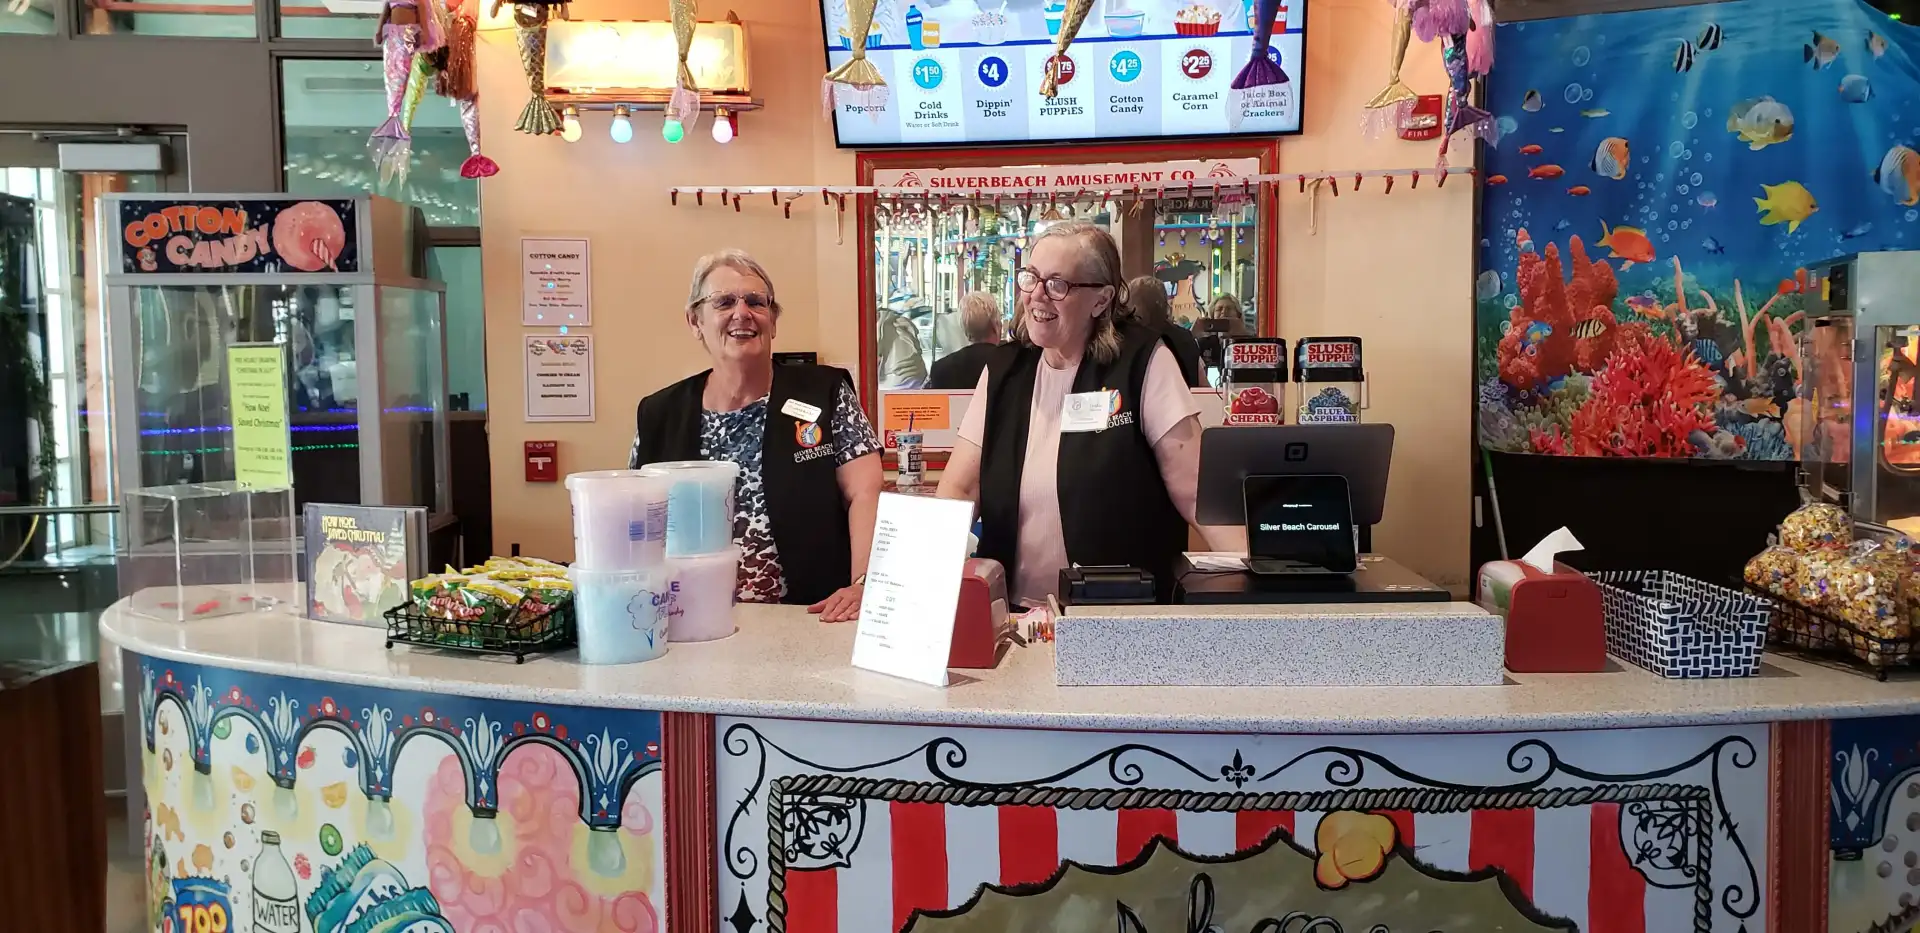 Volunteers helping at refreshment stand